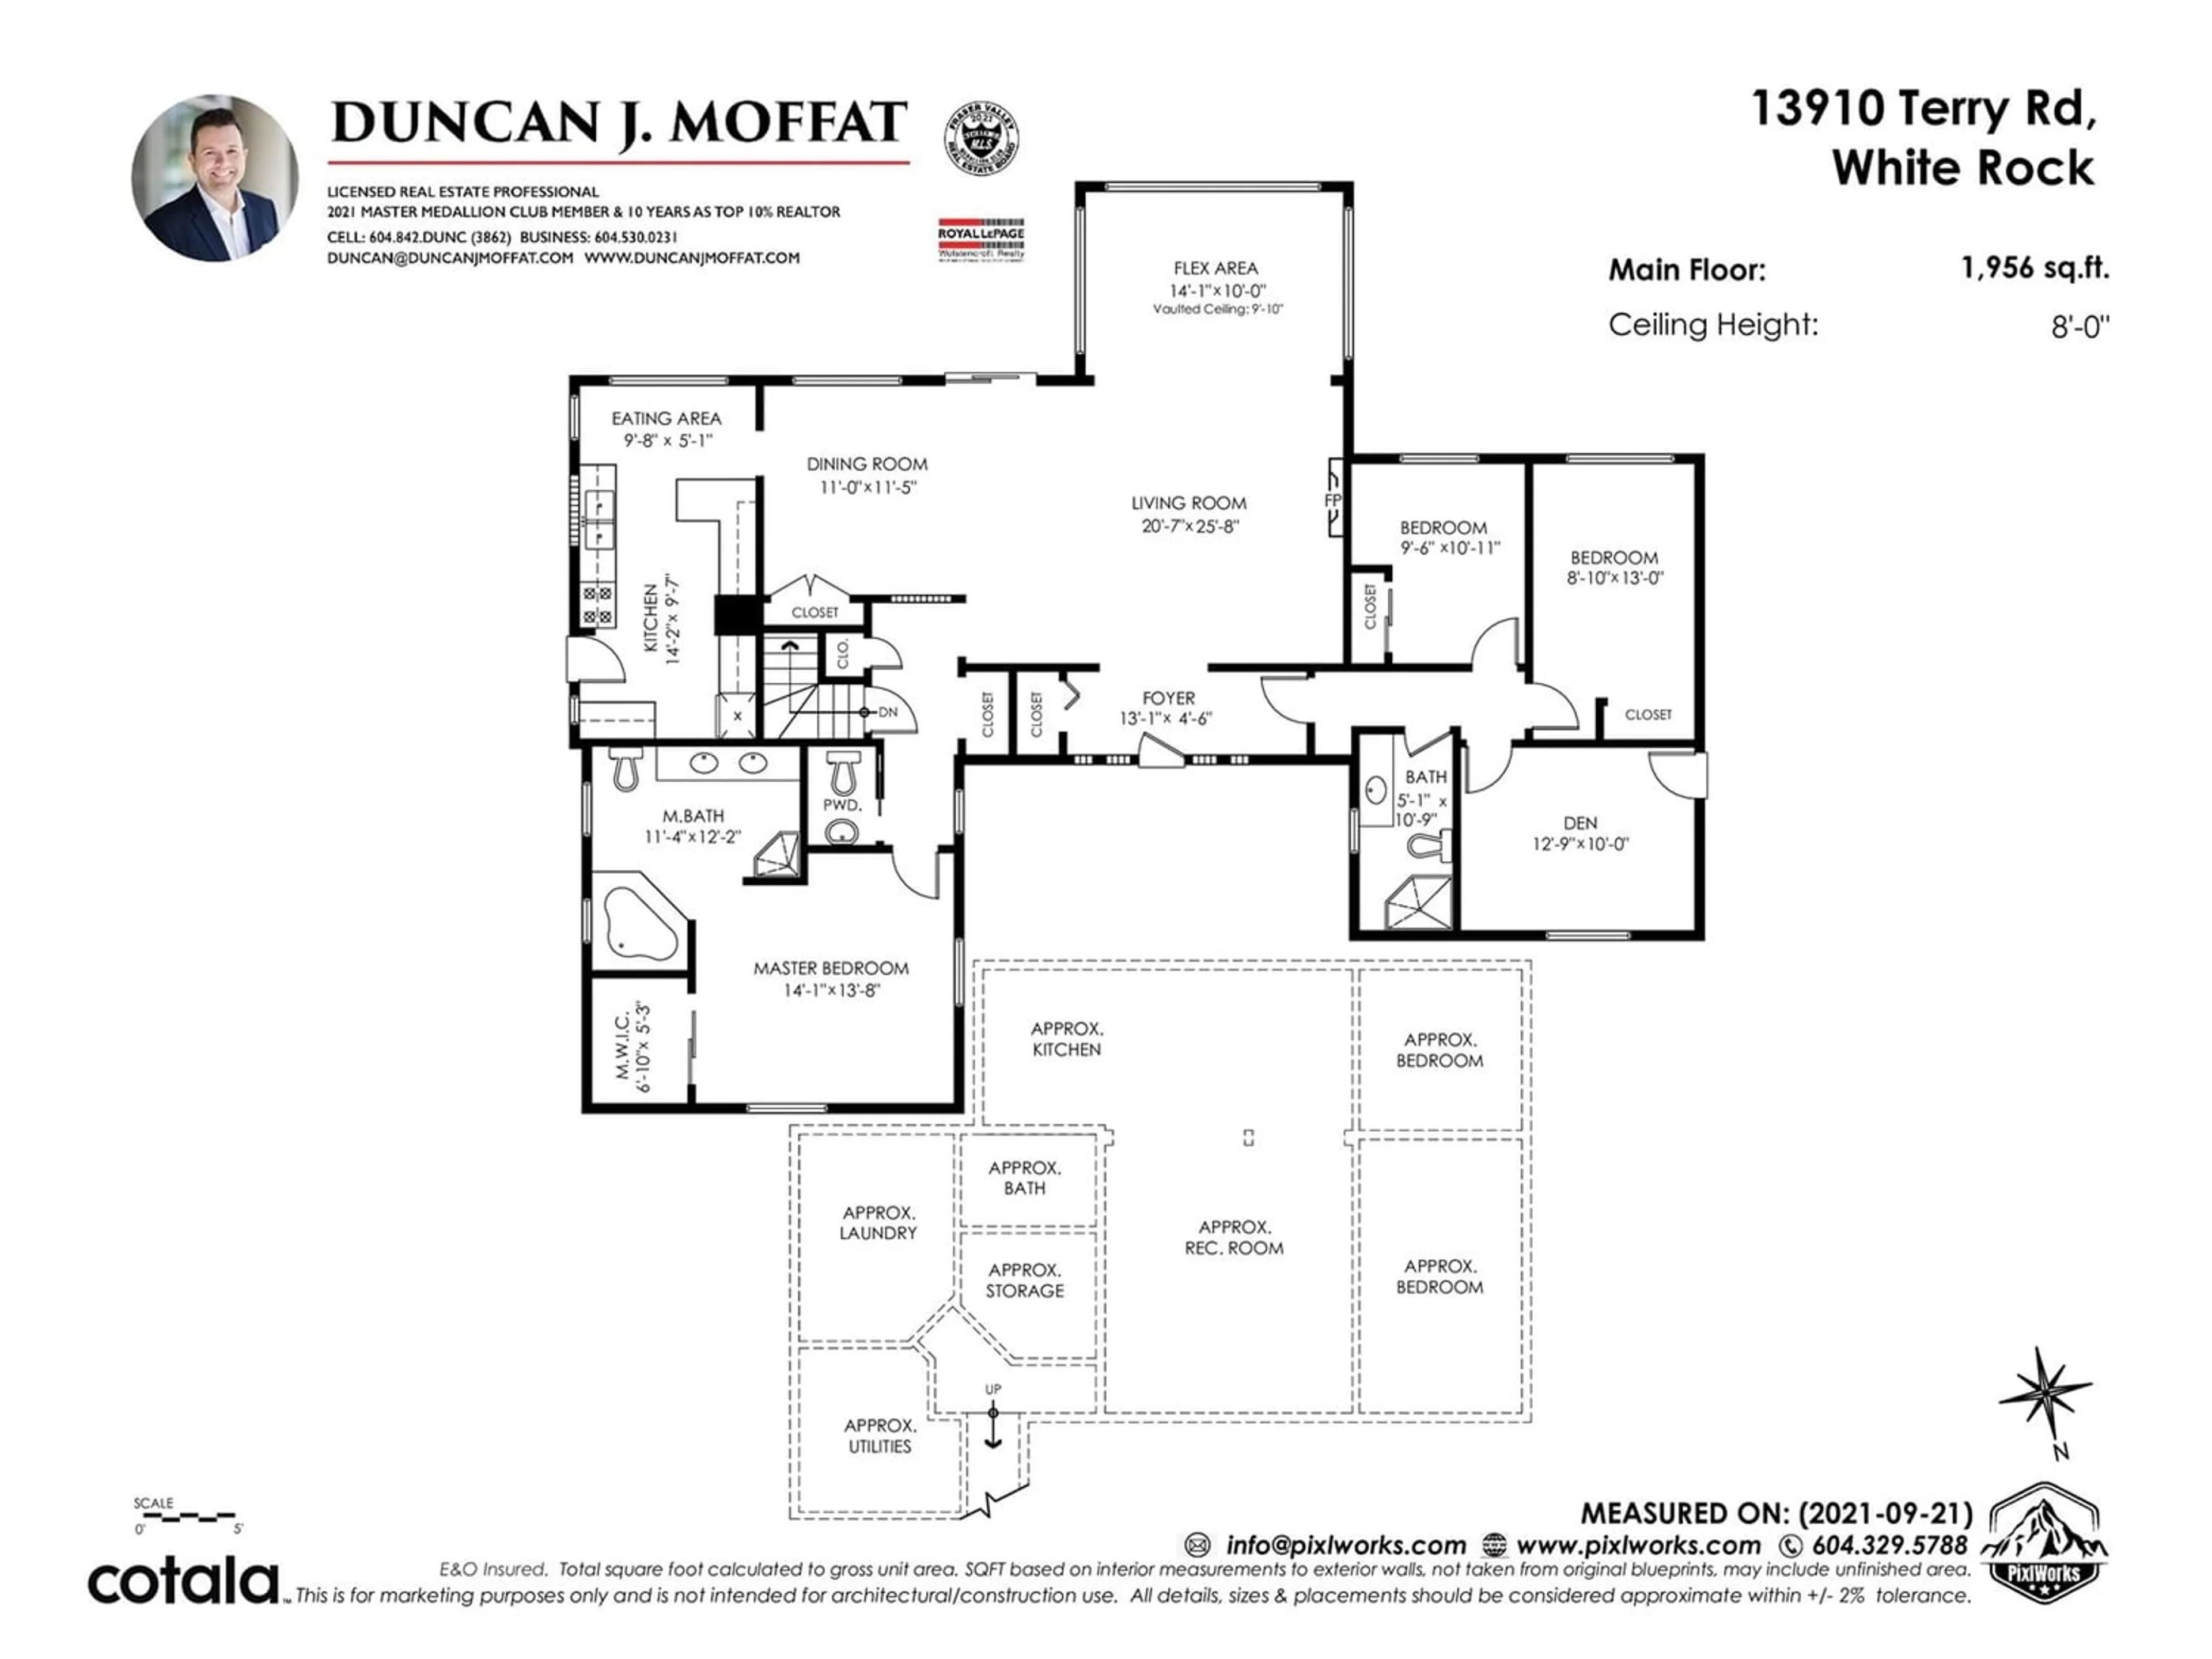 Floor plan for 13910 TERRY ROAD, White Rock British Columbia V4B1A2